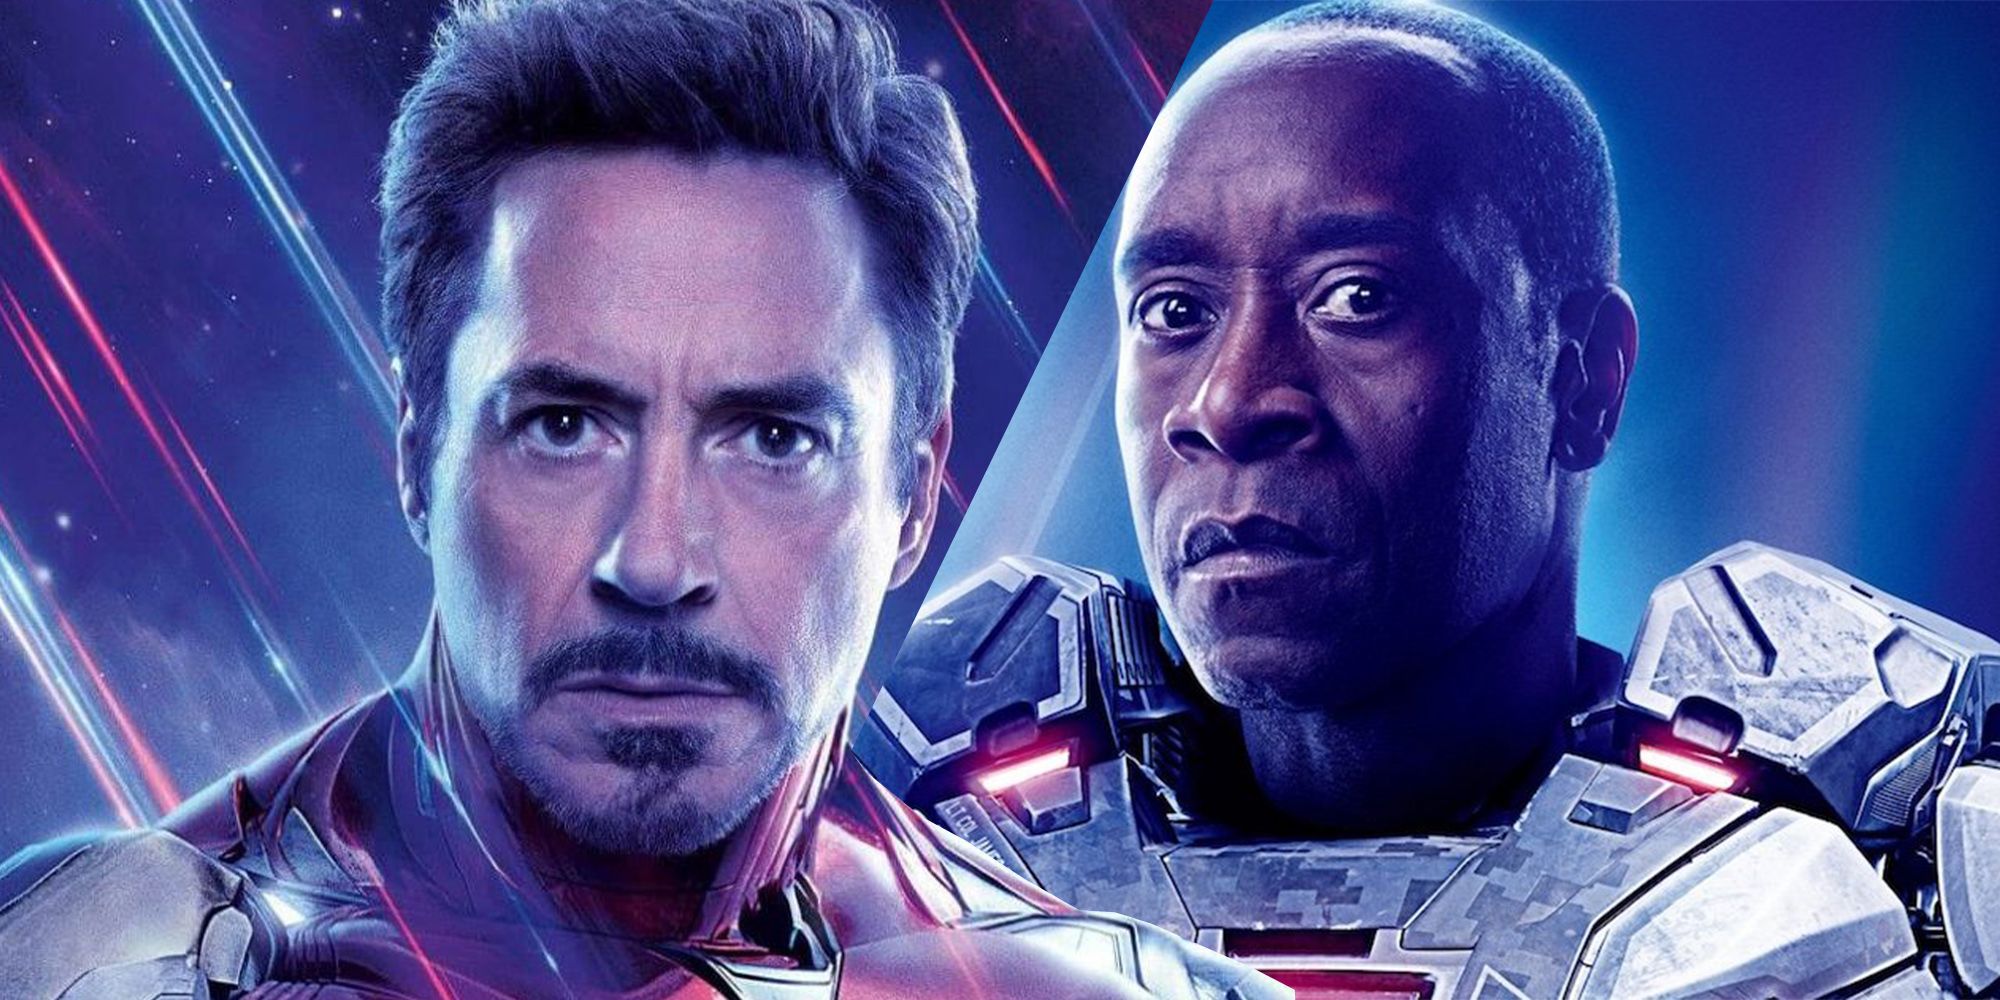 Robert Downey Jr.'s Tony Stark, Also Known As Iron Man, Alongside Don Cheadle's James Rhodes, Also Known As  War Machine